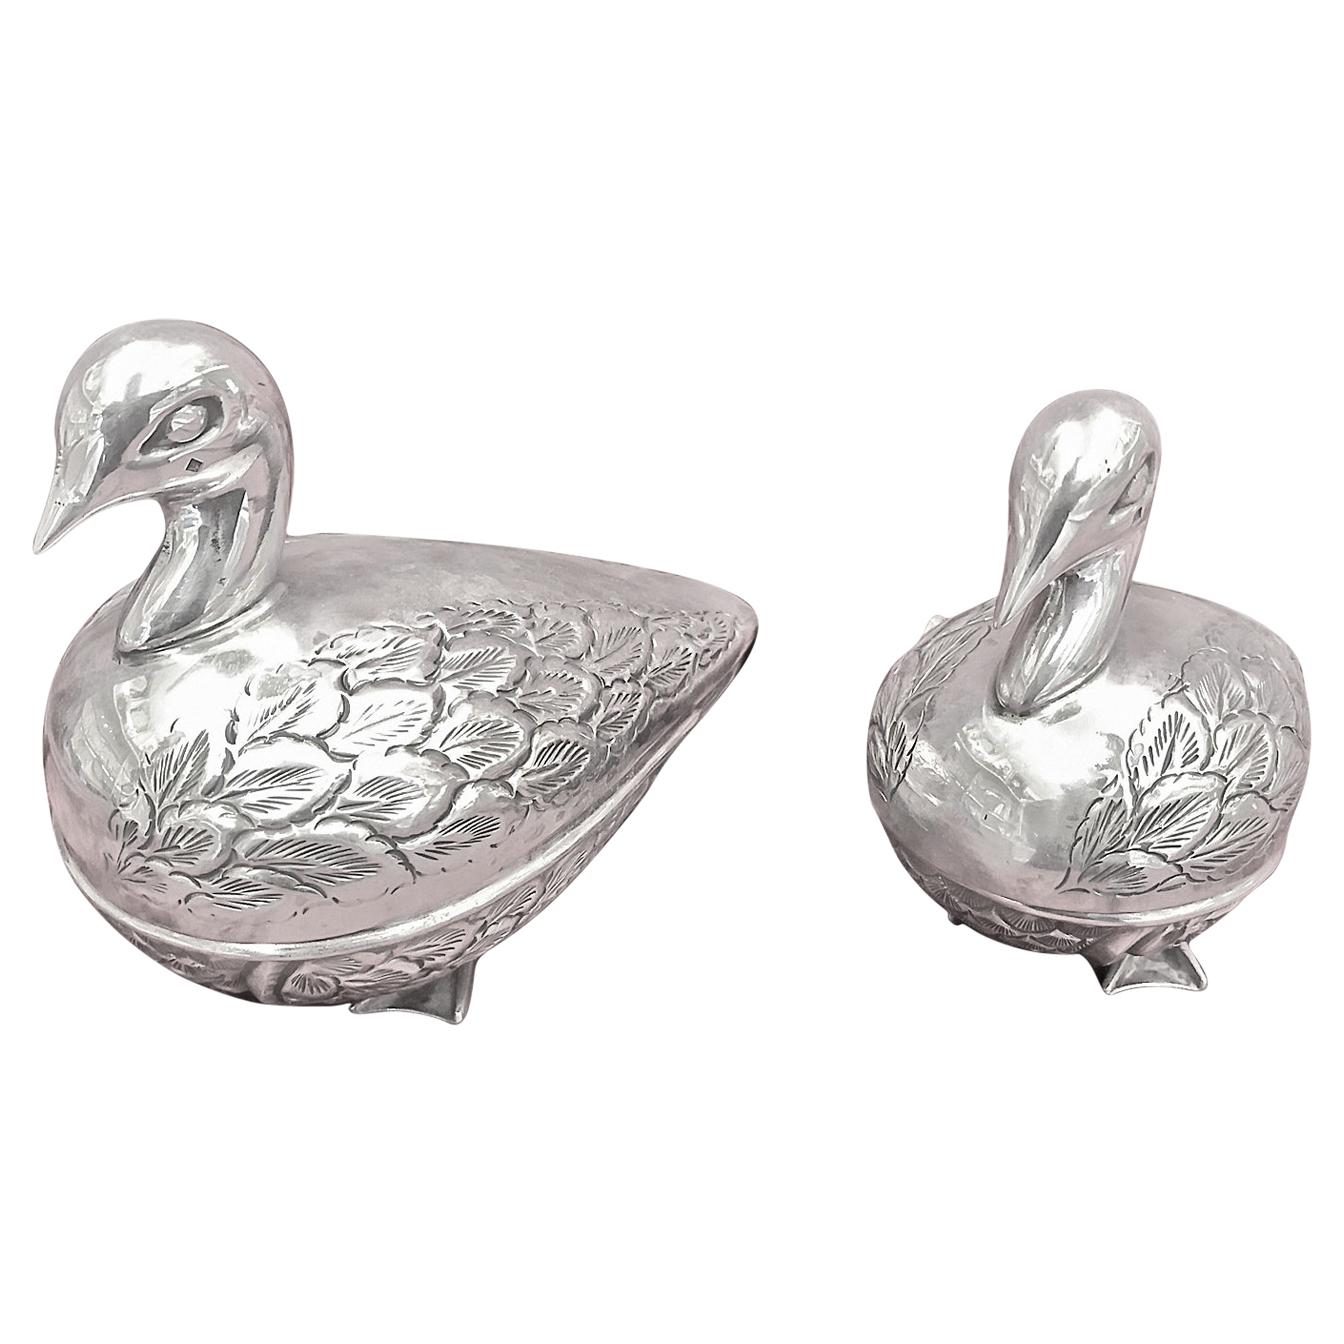 ONE PAIR OF STERLING SILVER  FIGURINES DUCK, Hand Made For Sale